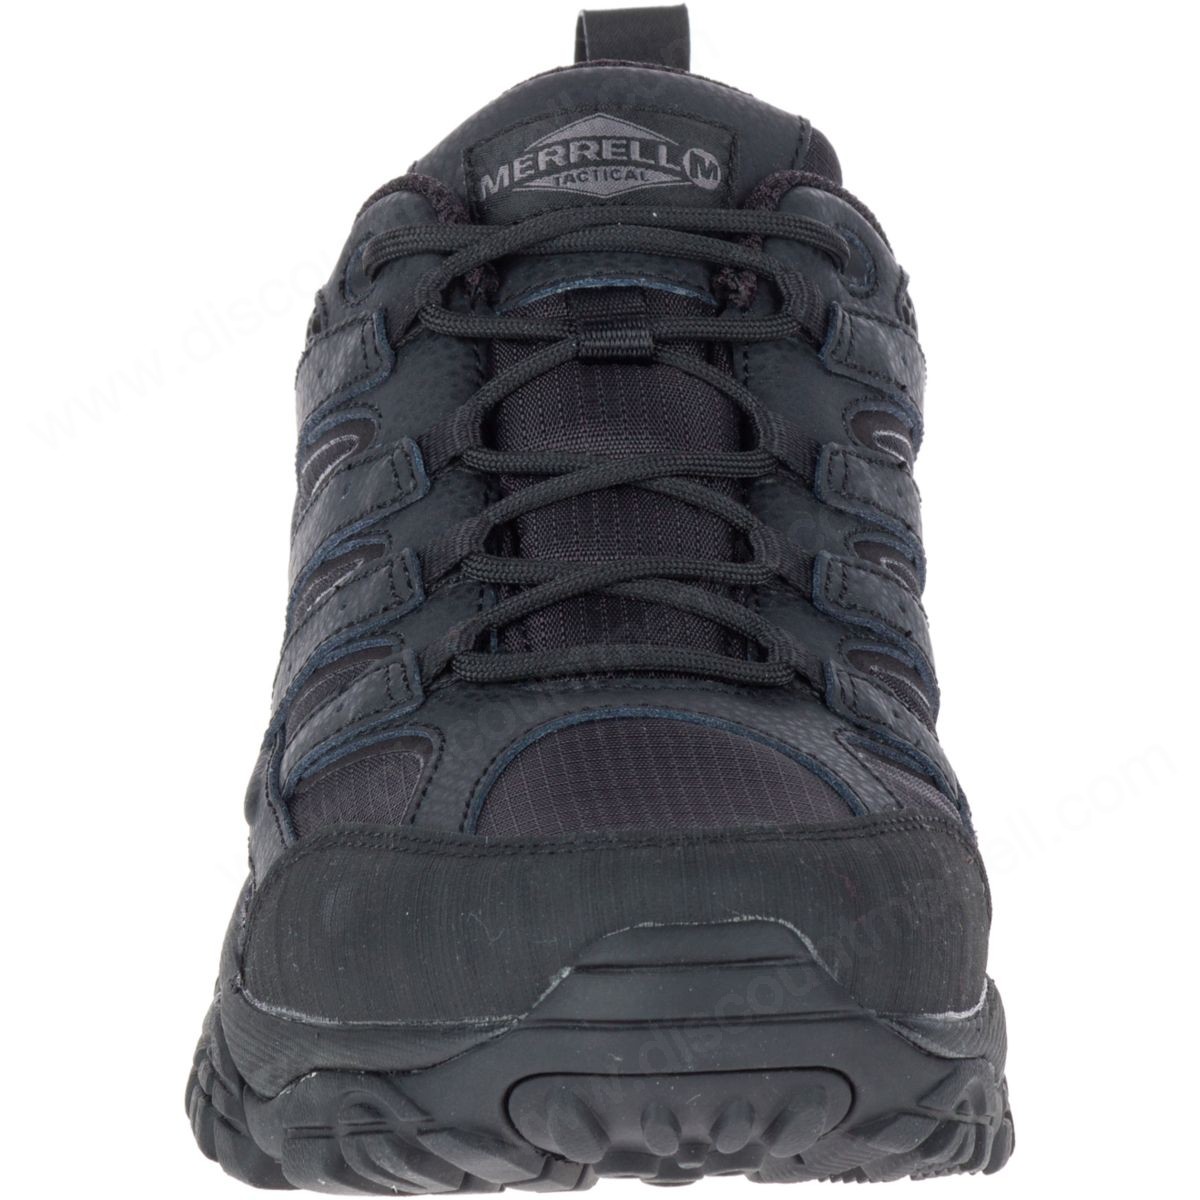 Merrell Man's Moab Tactical Shoes Wide Black - -4